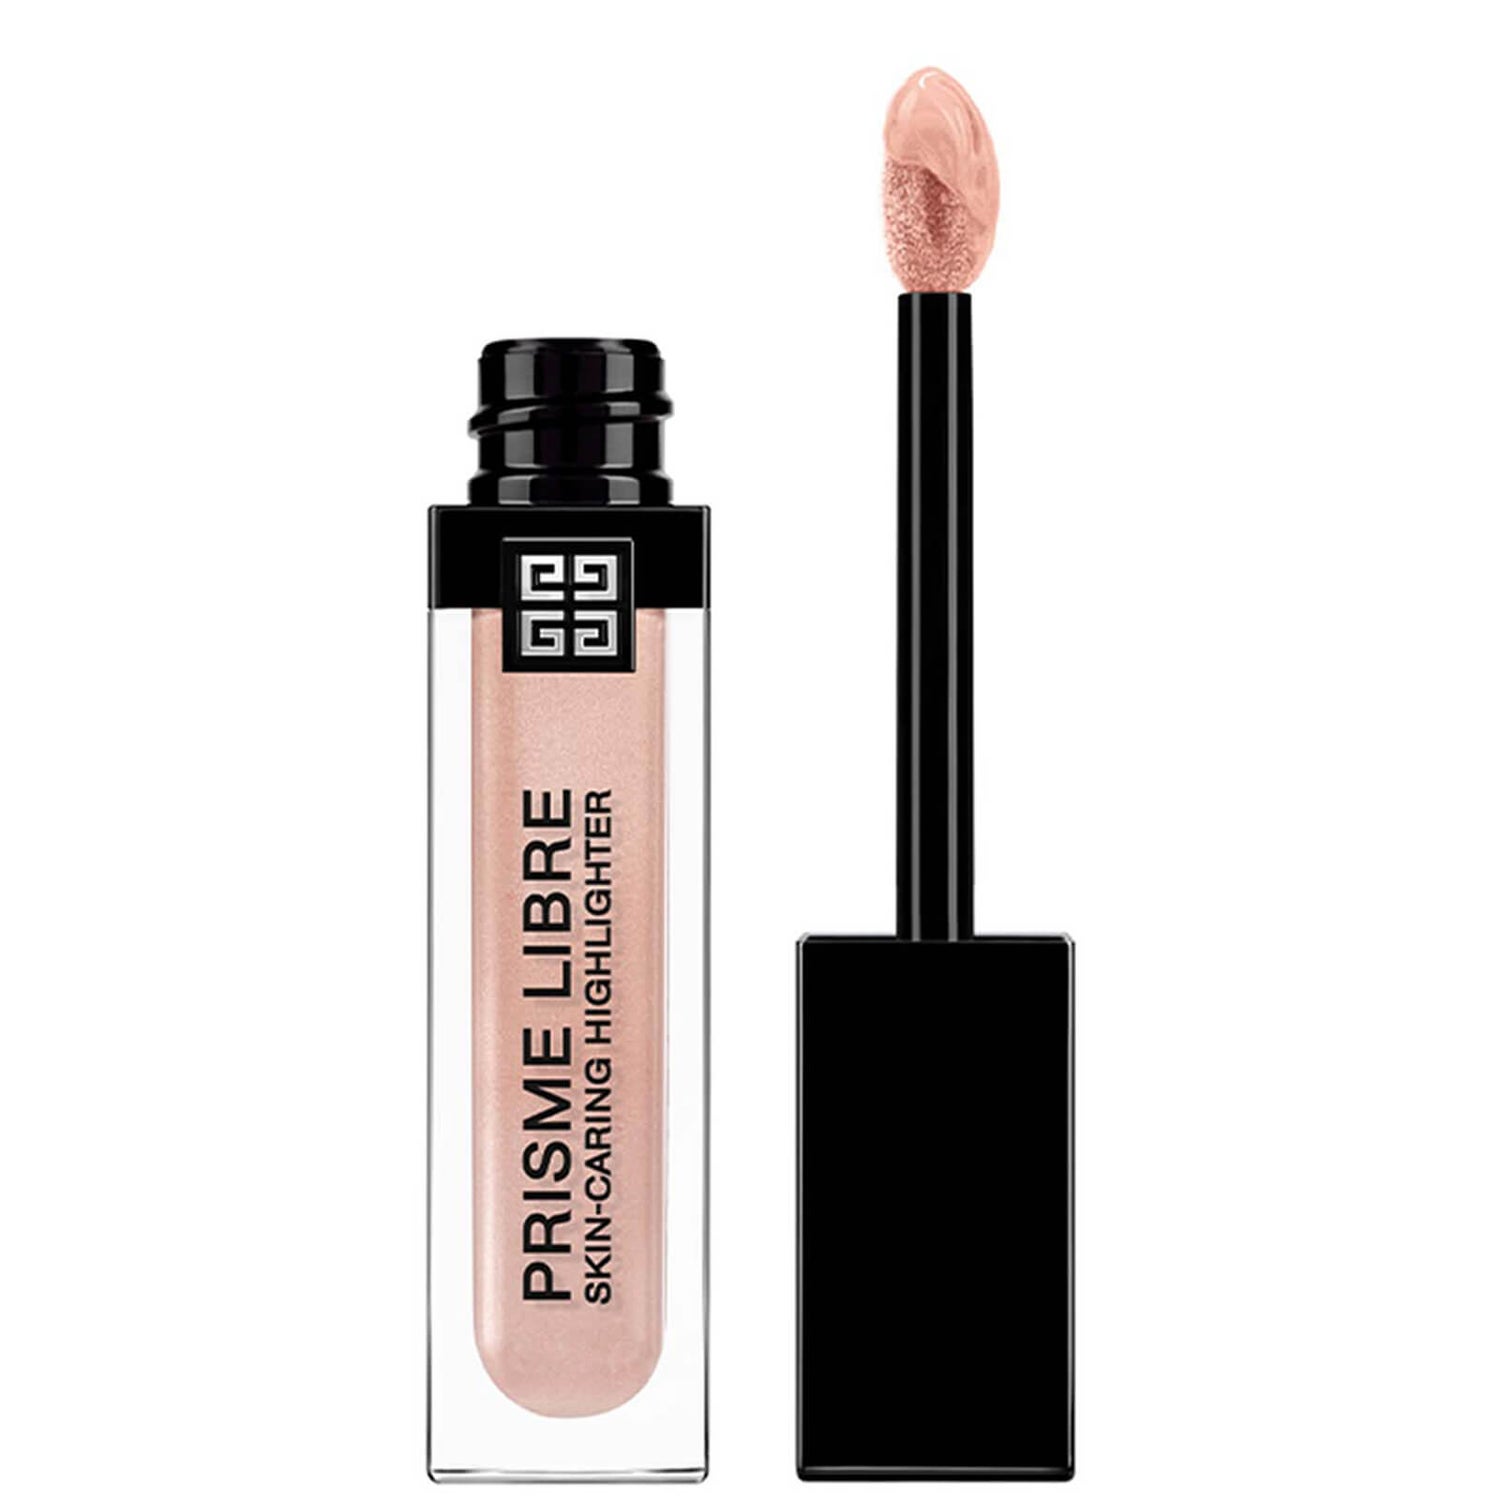 Givenchy Christmas Edition Prisme Libre Skin-Caring Highlighter - Pink 11ml (Worth £37.00)